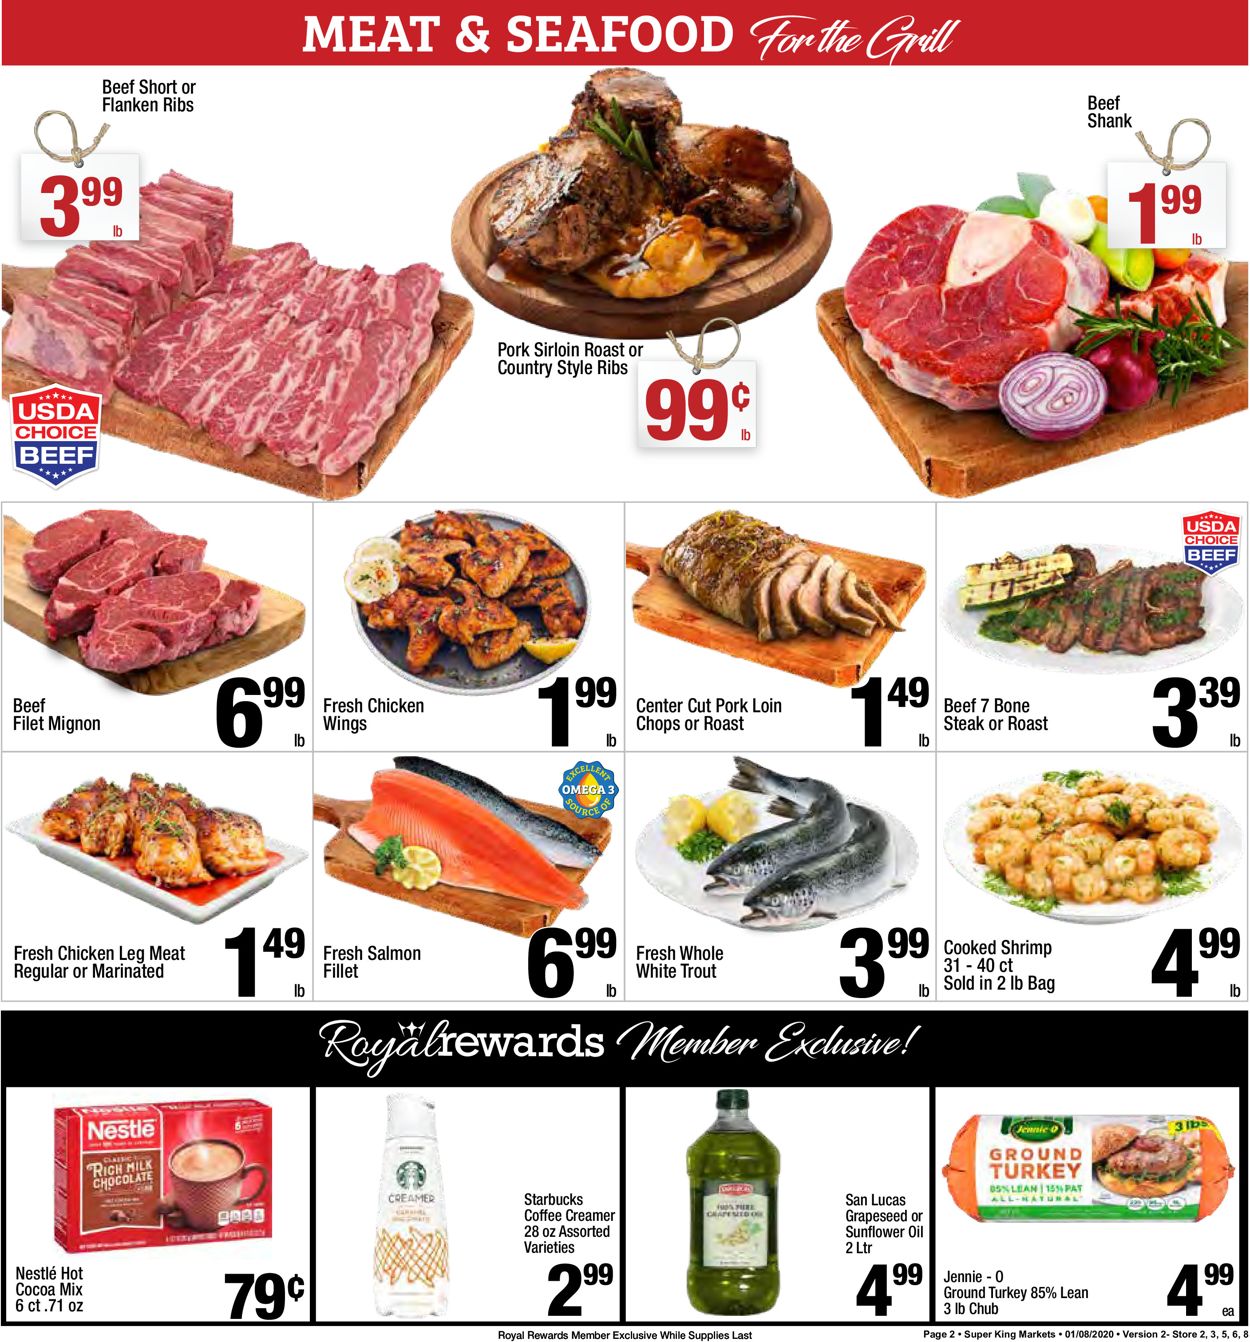 Catalogue Super King Market from 01/08/2020